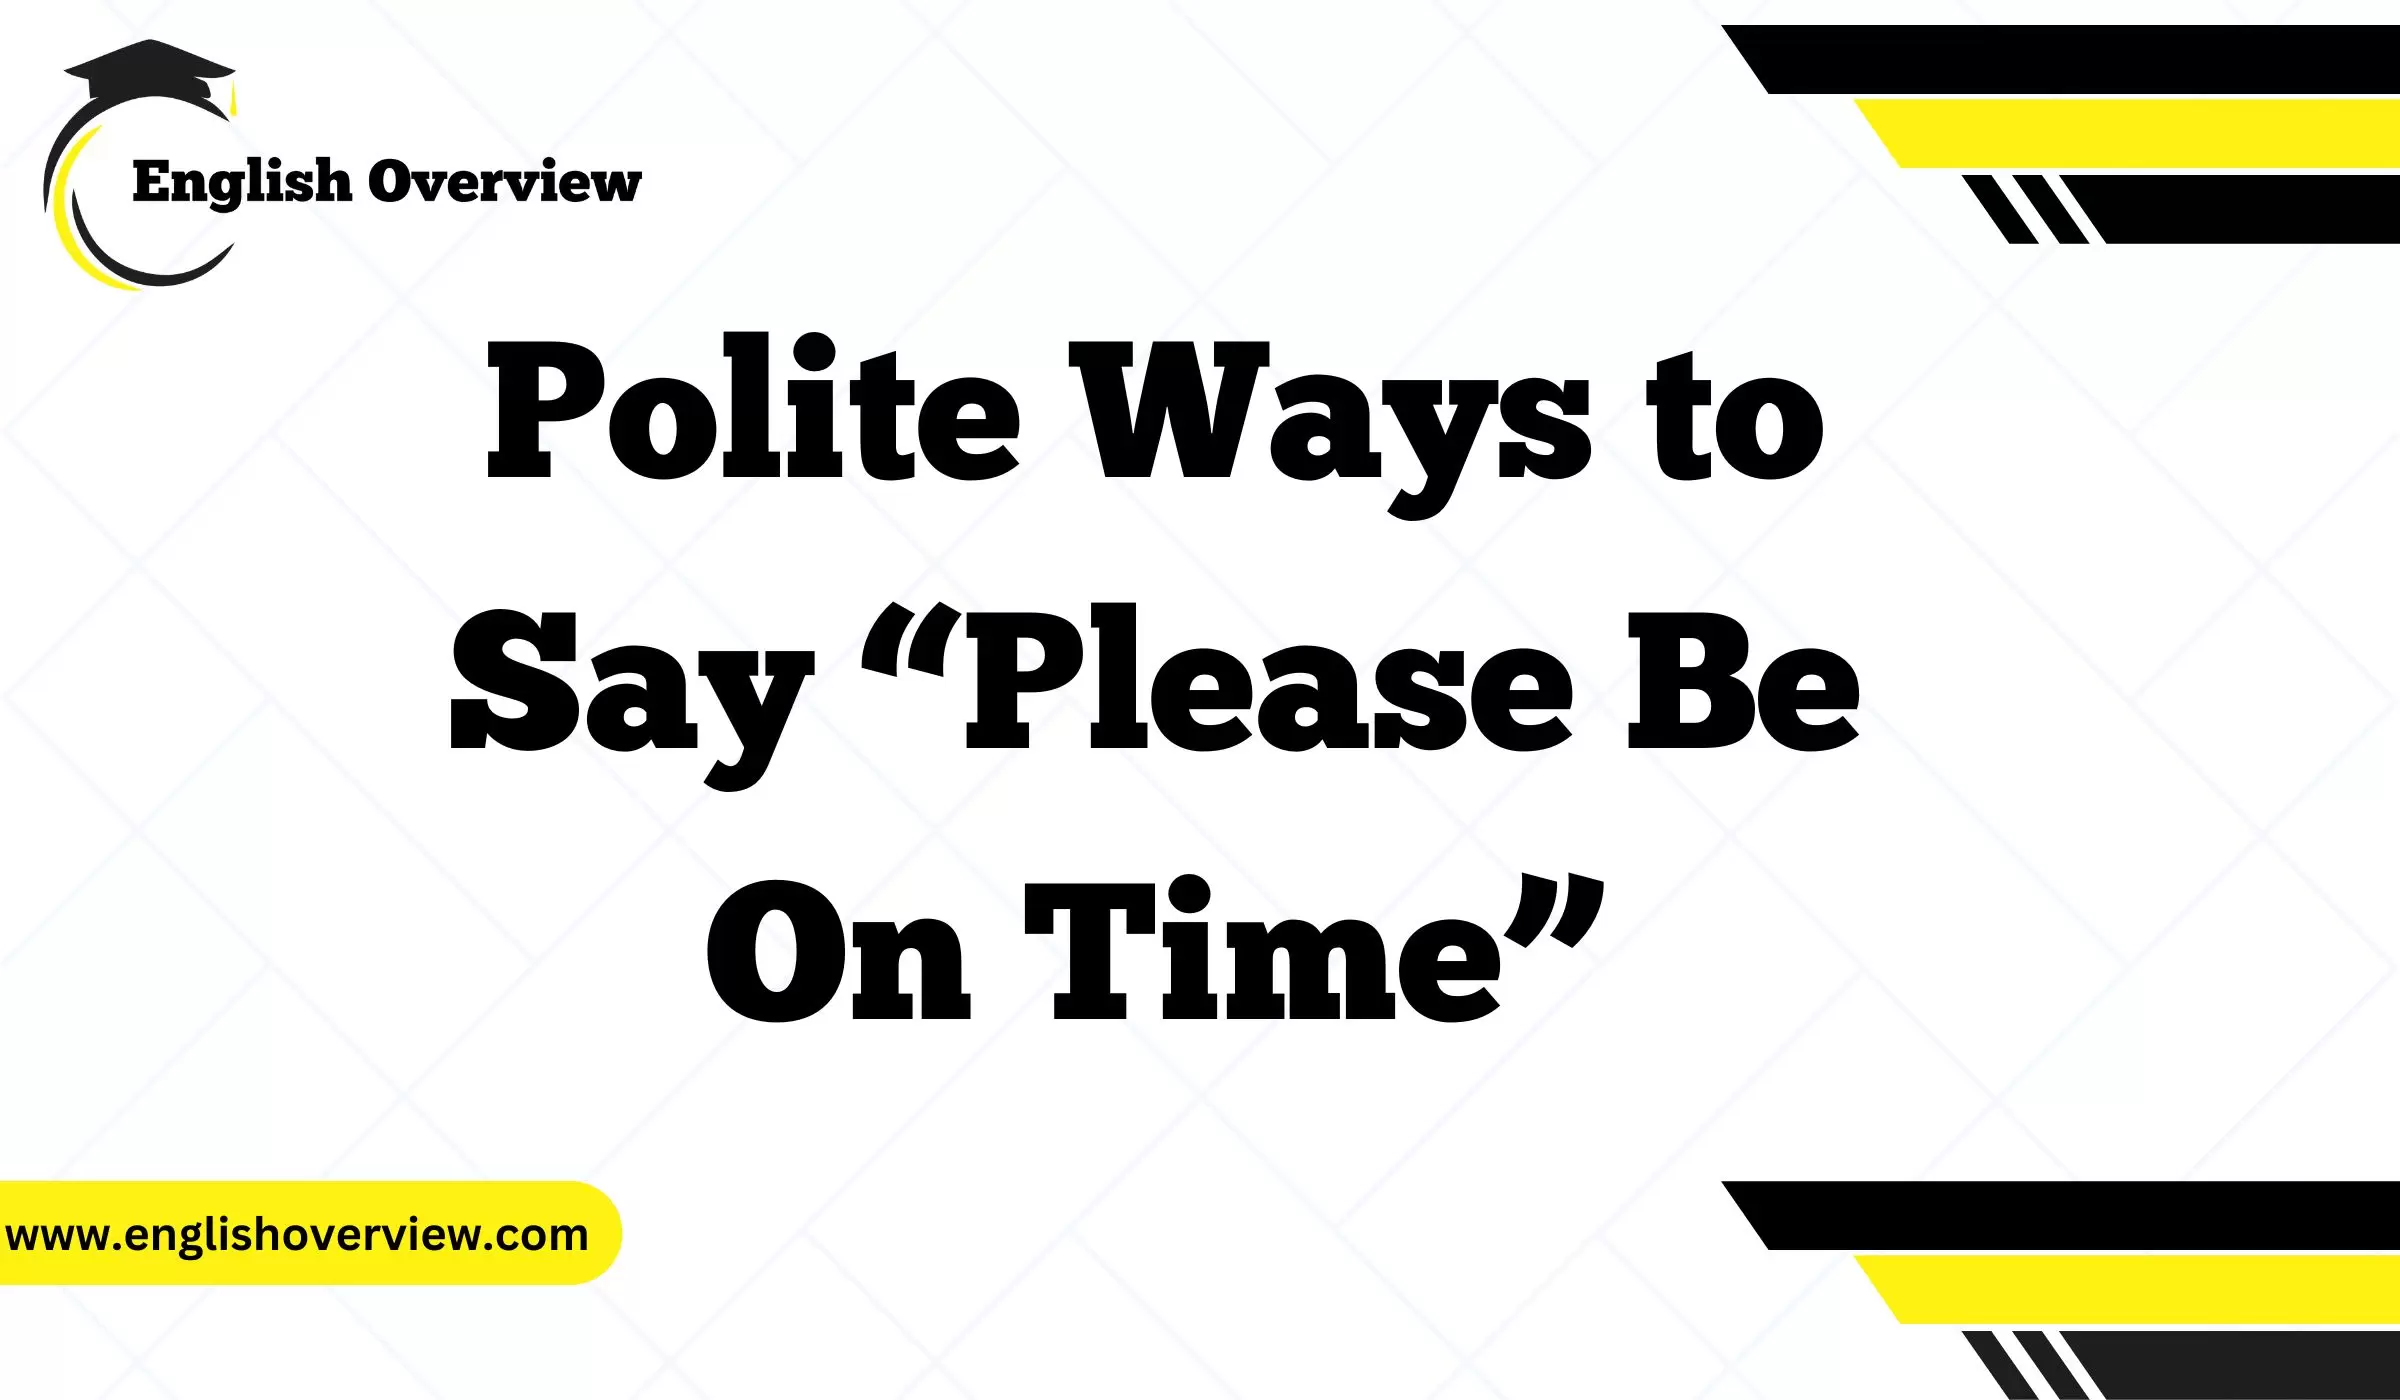 Polite Ways to Say “Please Be On Time”